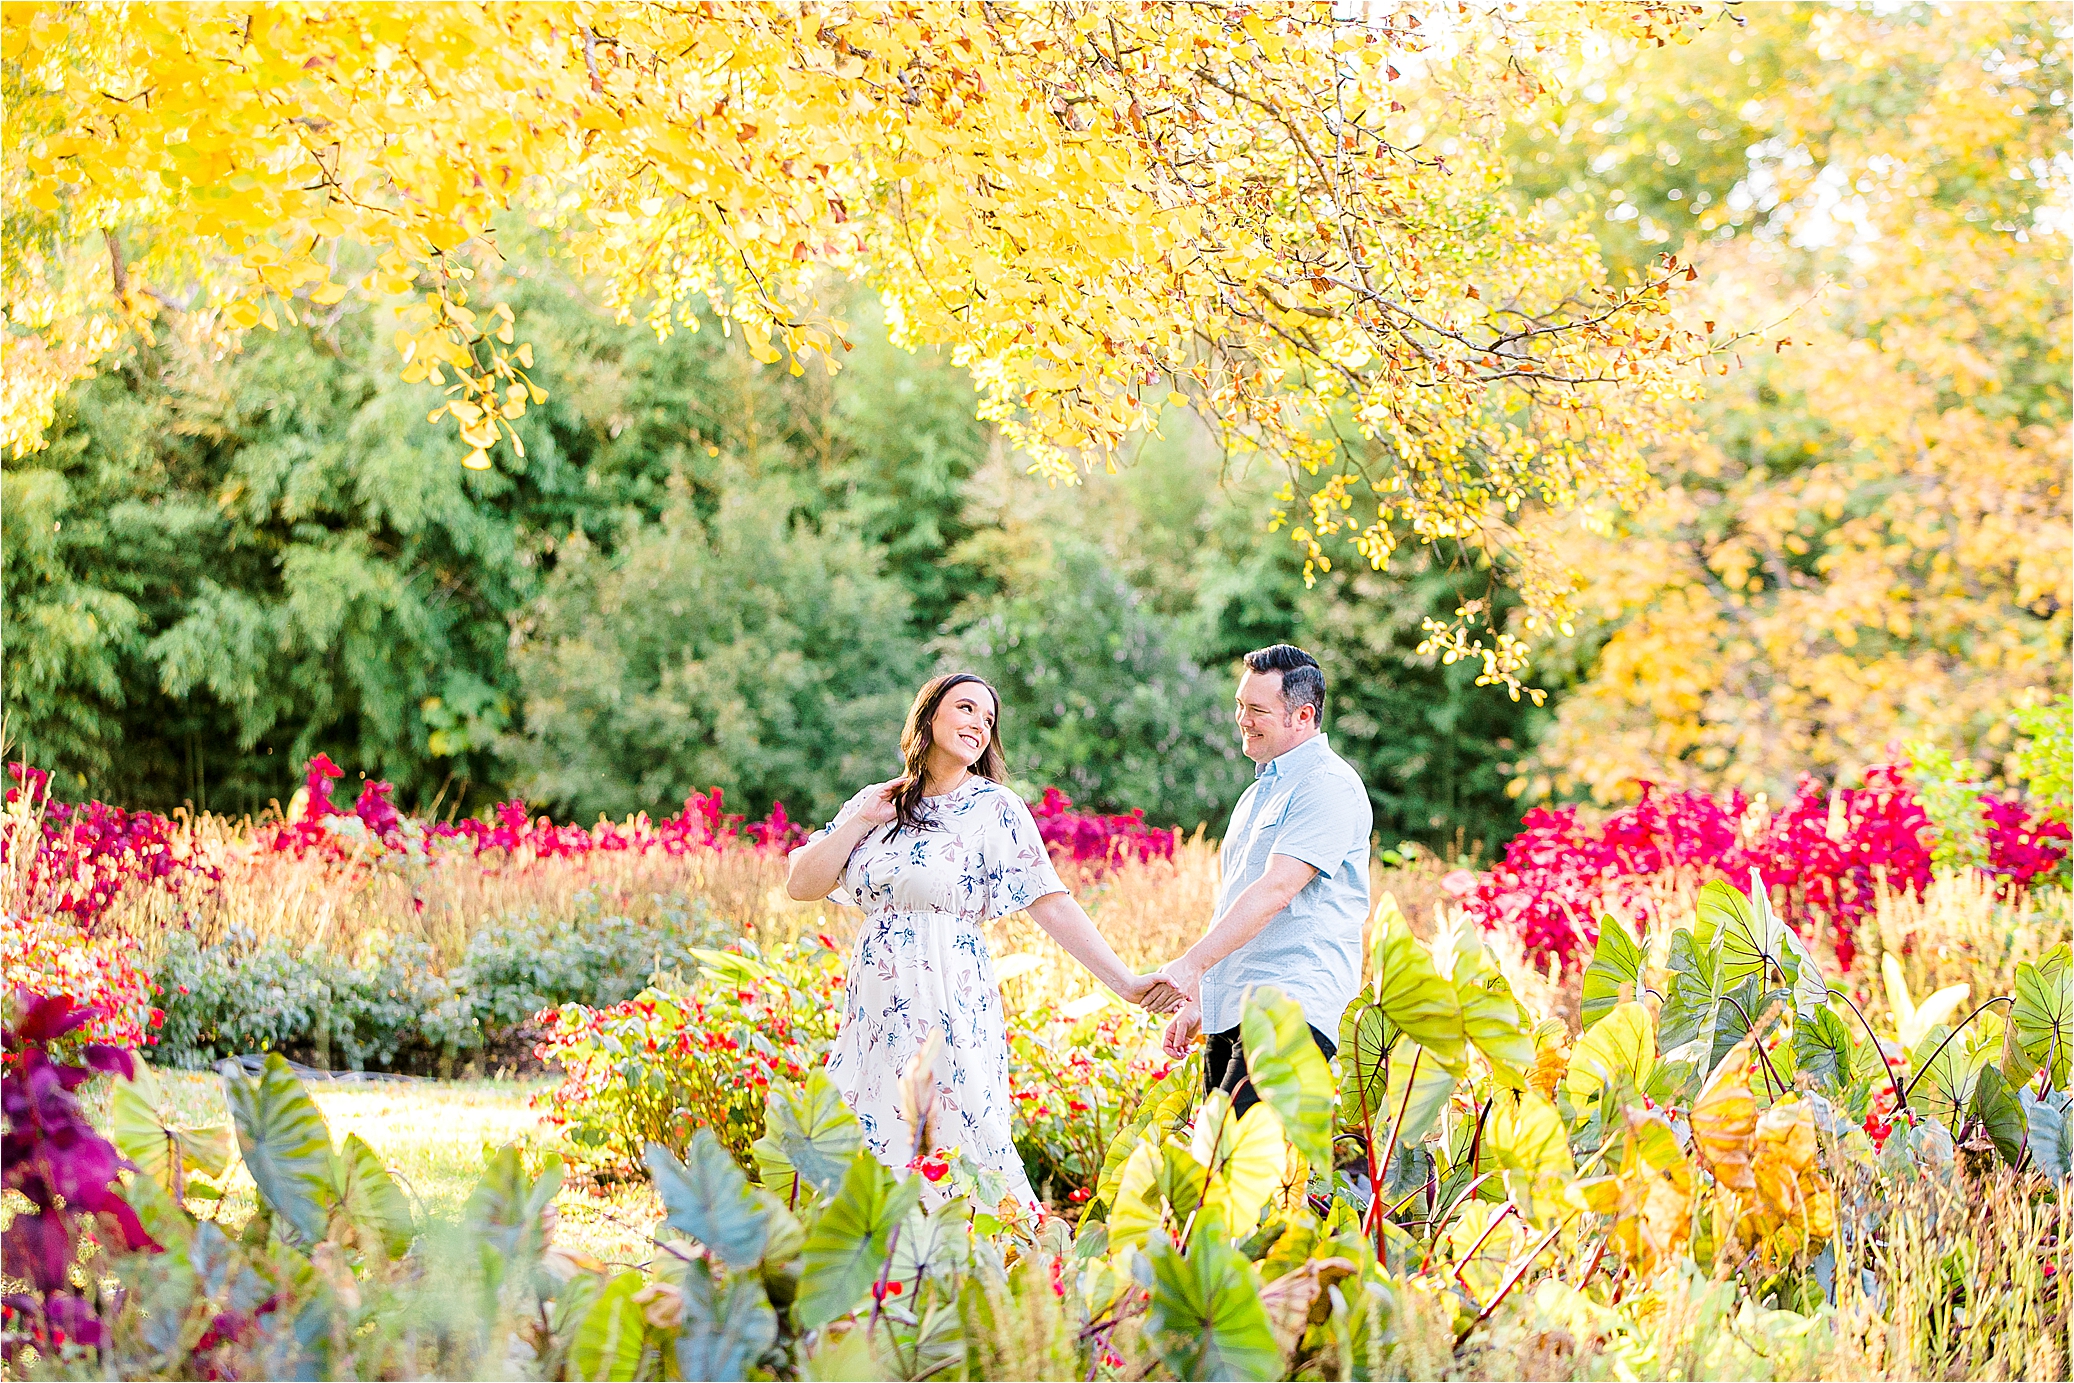 A bride-to-be leads her groom through a vibrant, color part of The Fort Worth Botanic Garden during their sunny, fall engagement session with Jillian Hogan Photography 